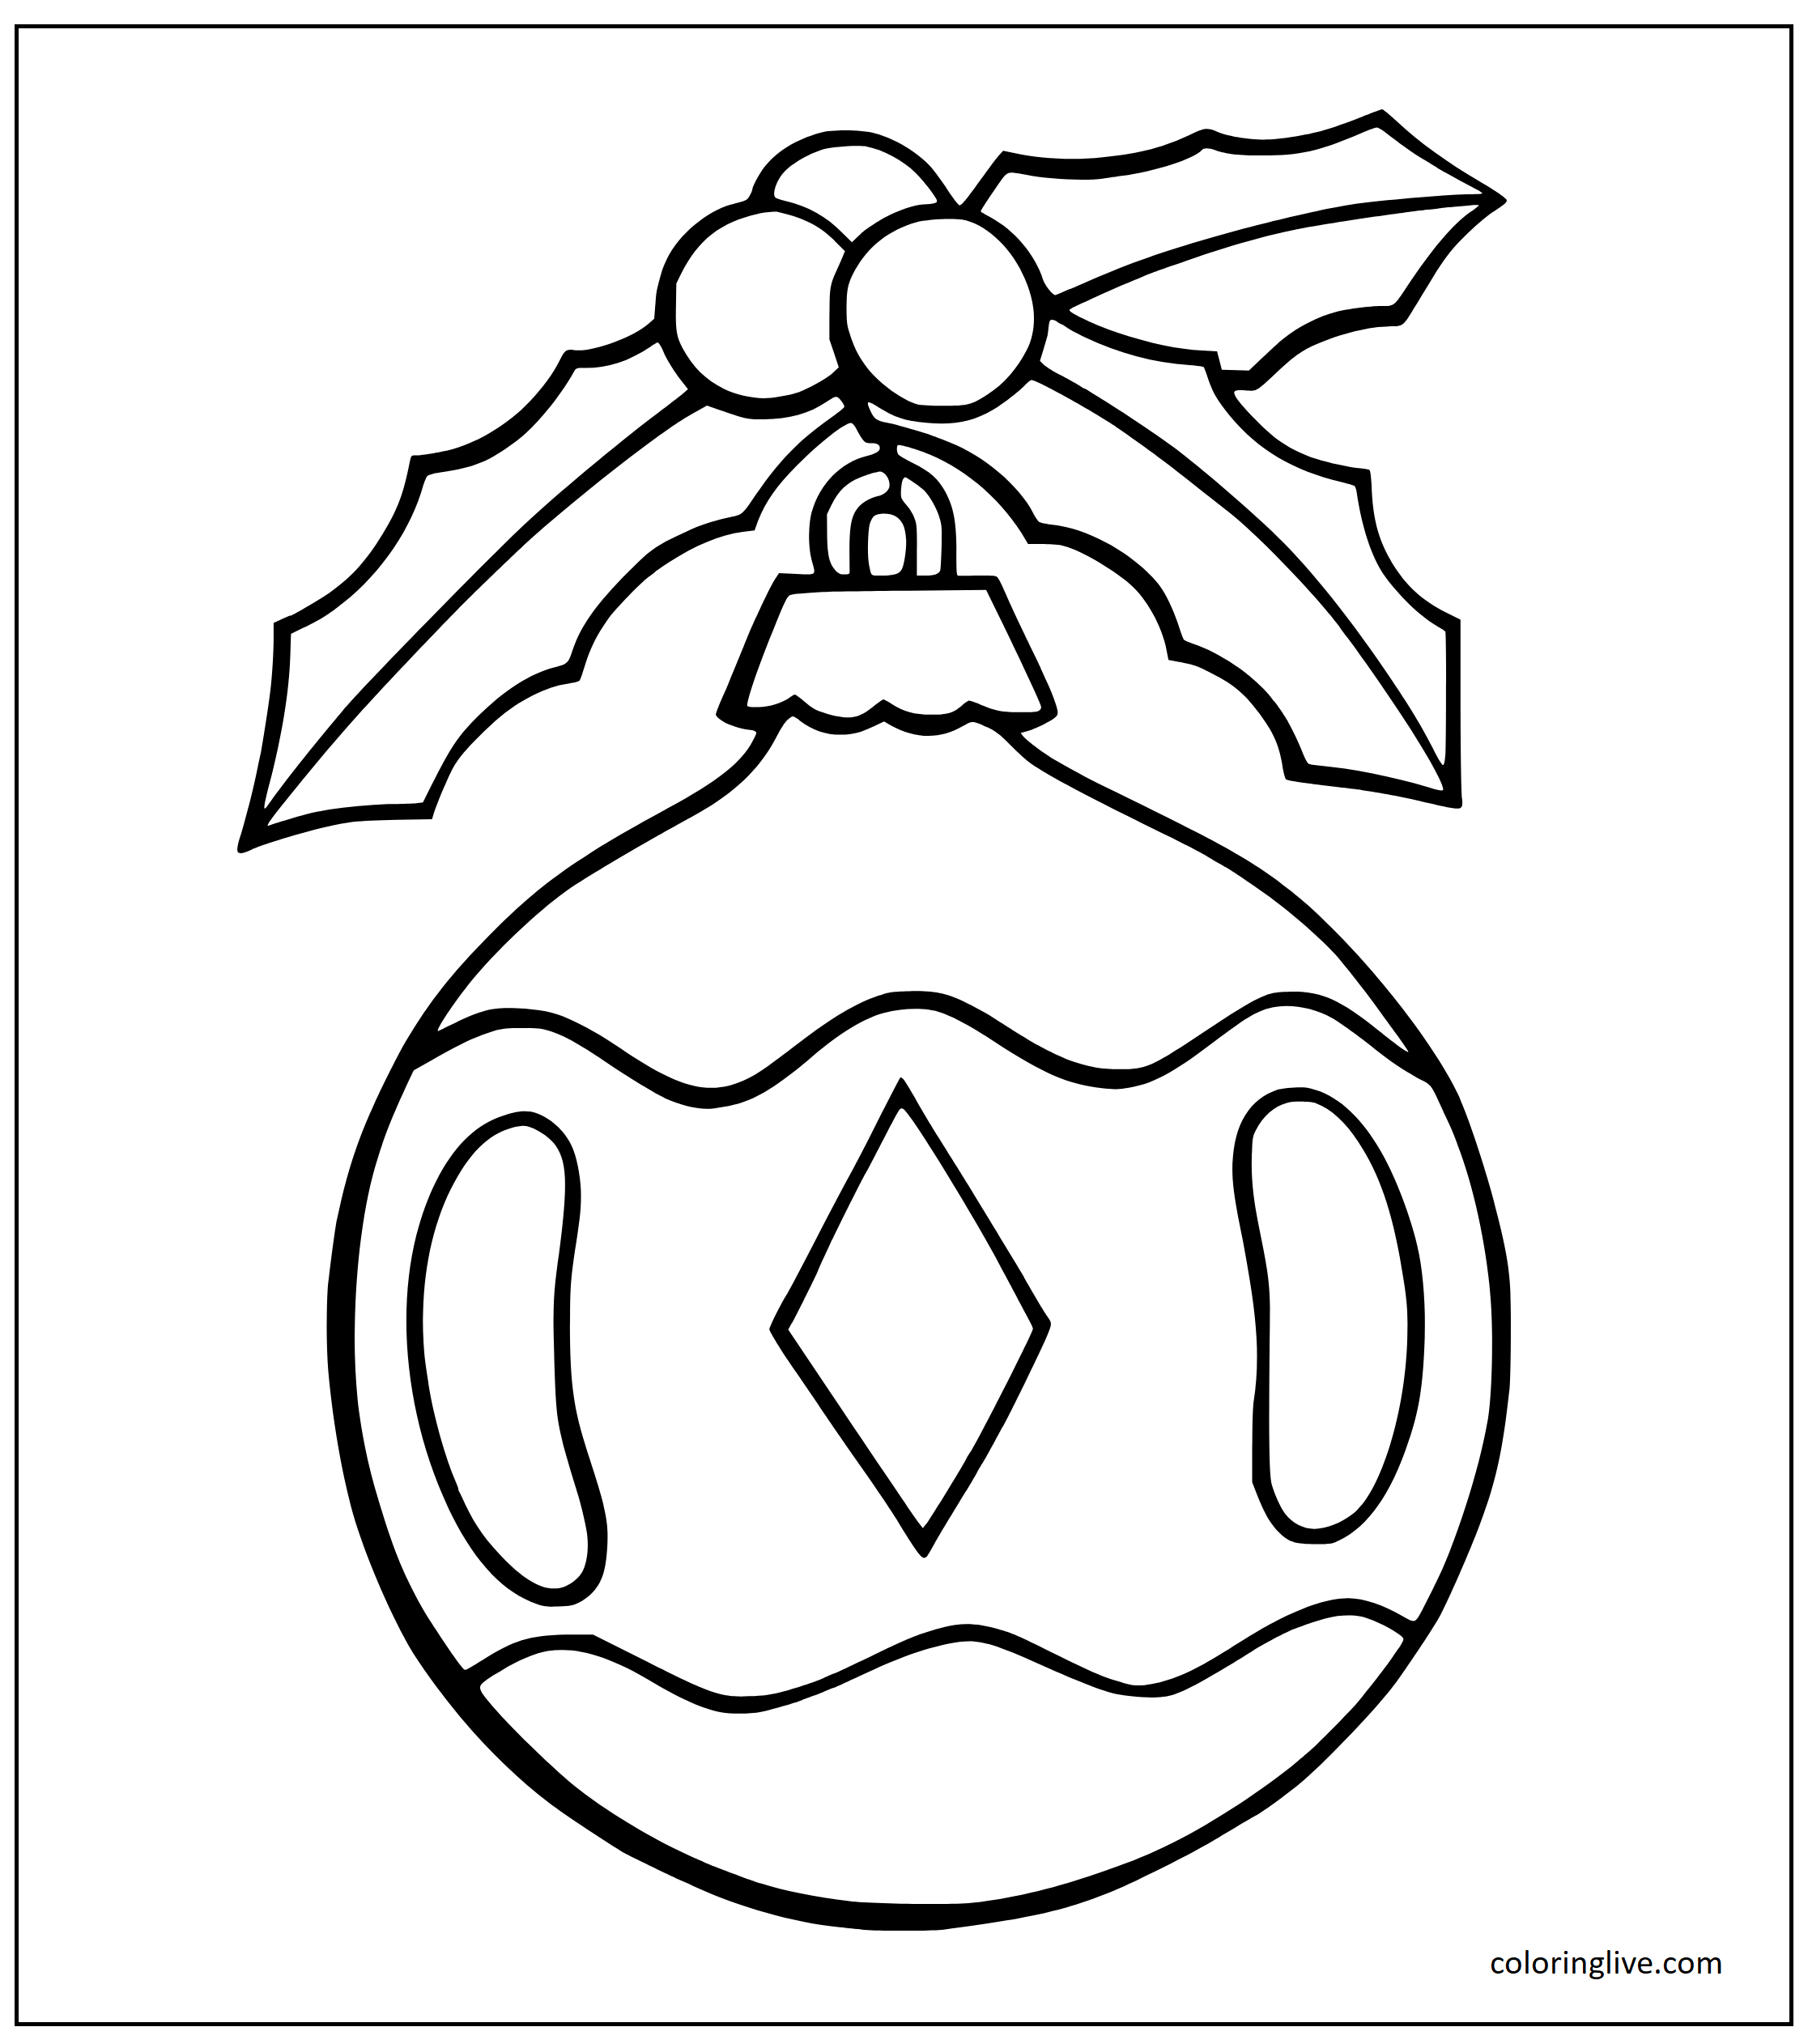 Printable Christmas Ornaments Halloween Shaped Coloring Page for kids.